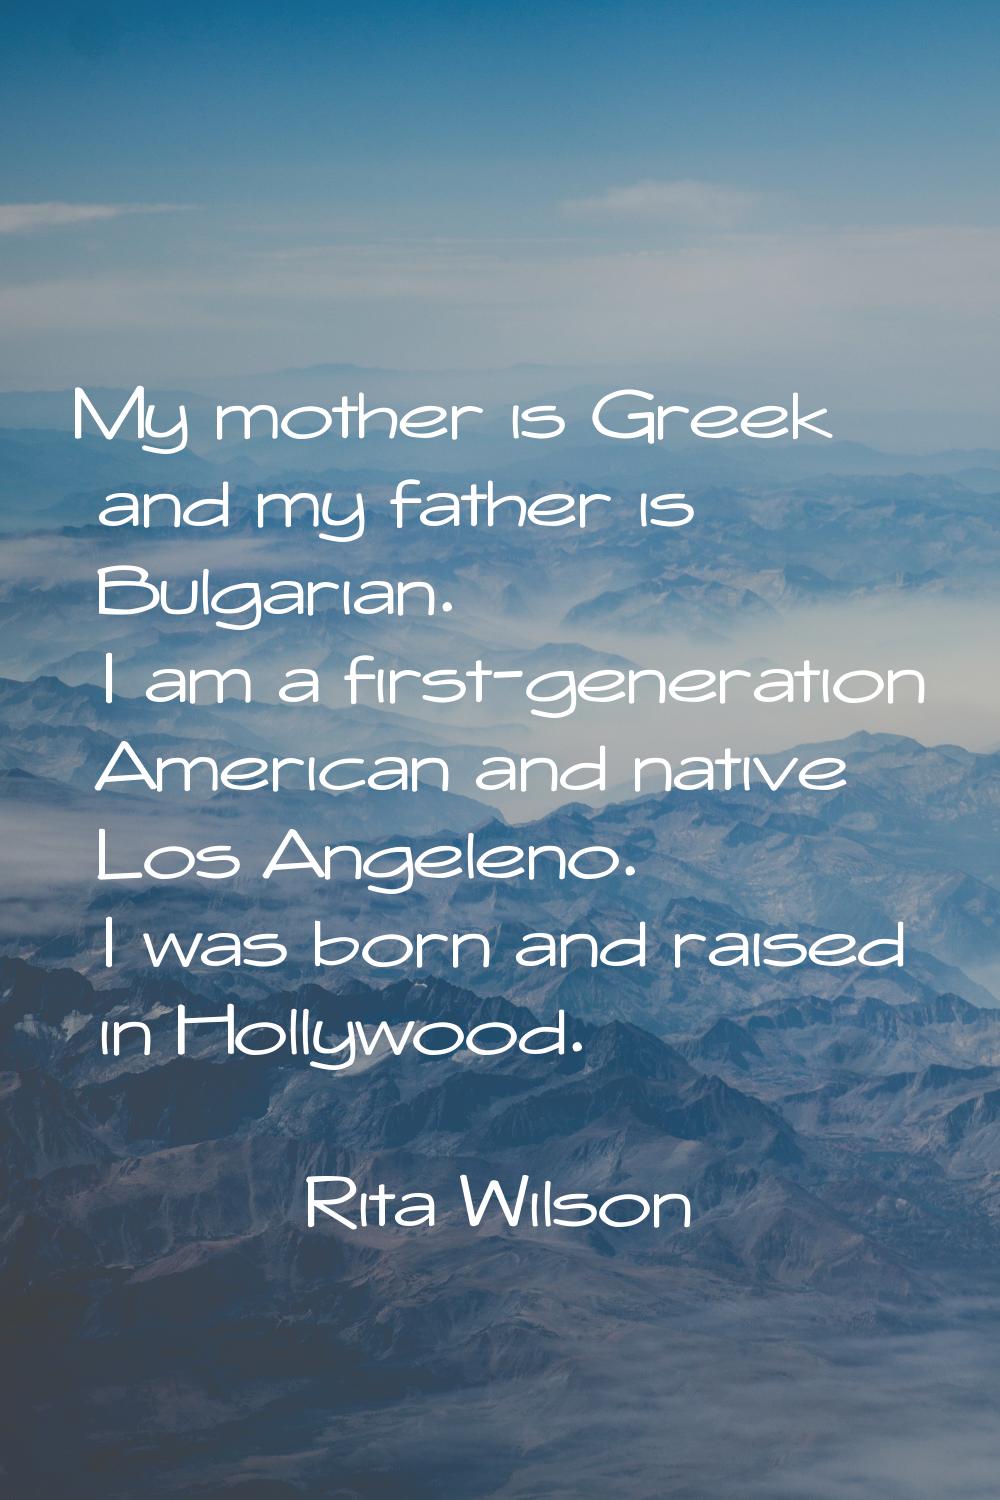 My mother is Greek and my father is Bulgarian. I am a first-generation American and native Los Ange